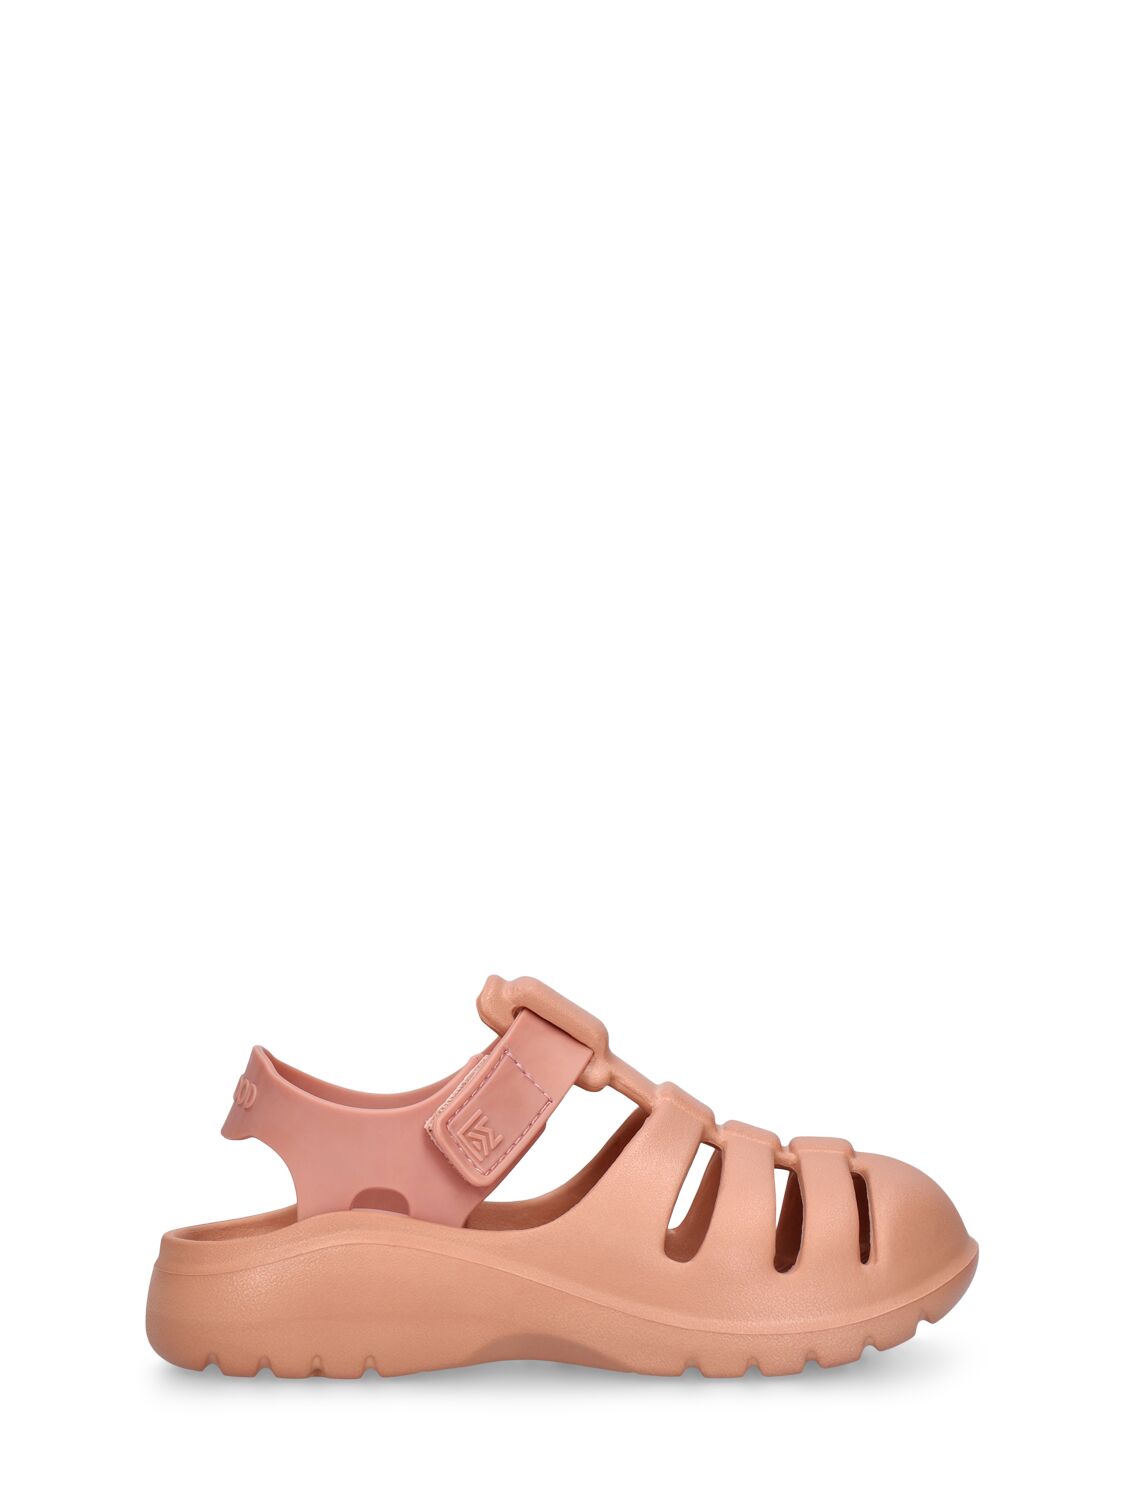 Liewood Kids' Rubber Jelly Sandals In Pink